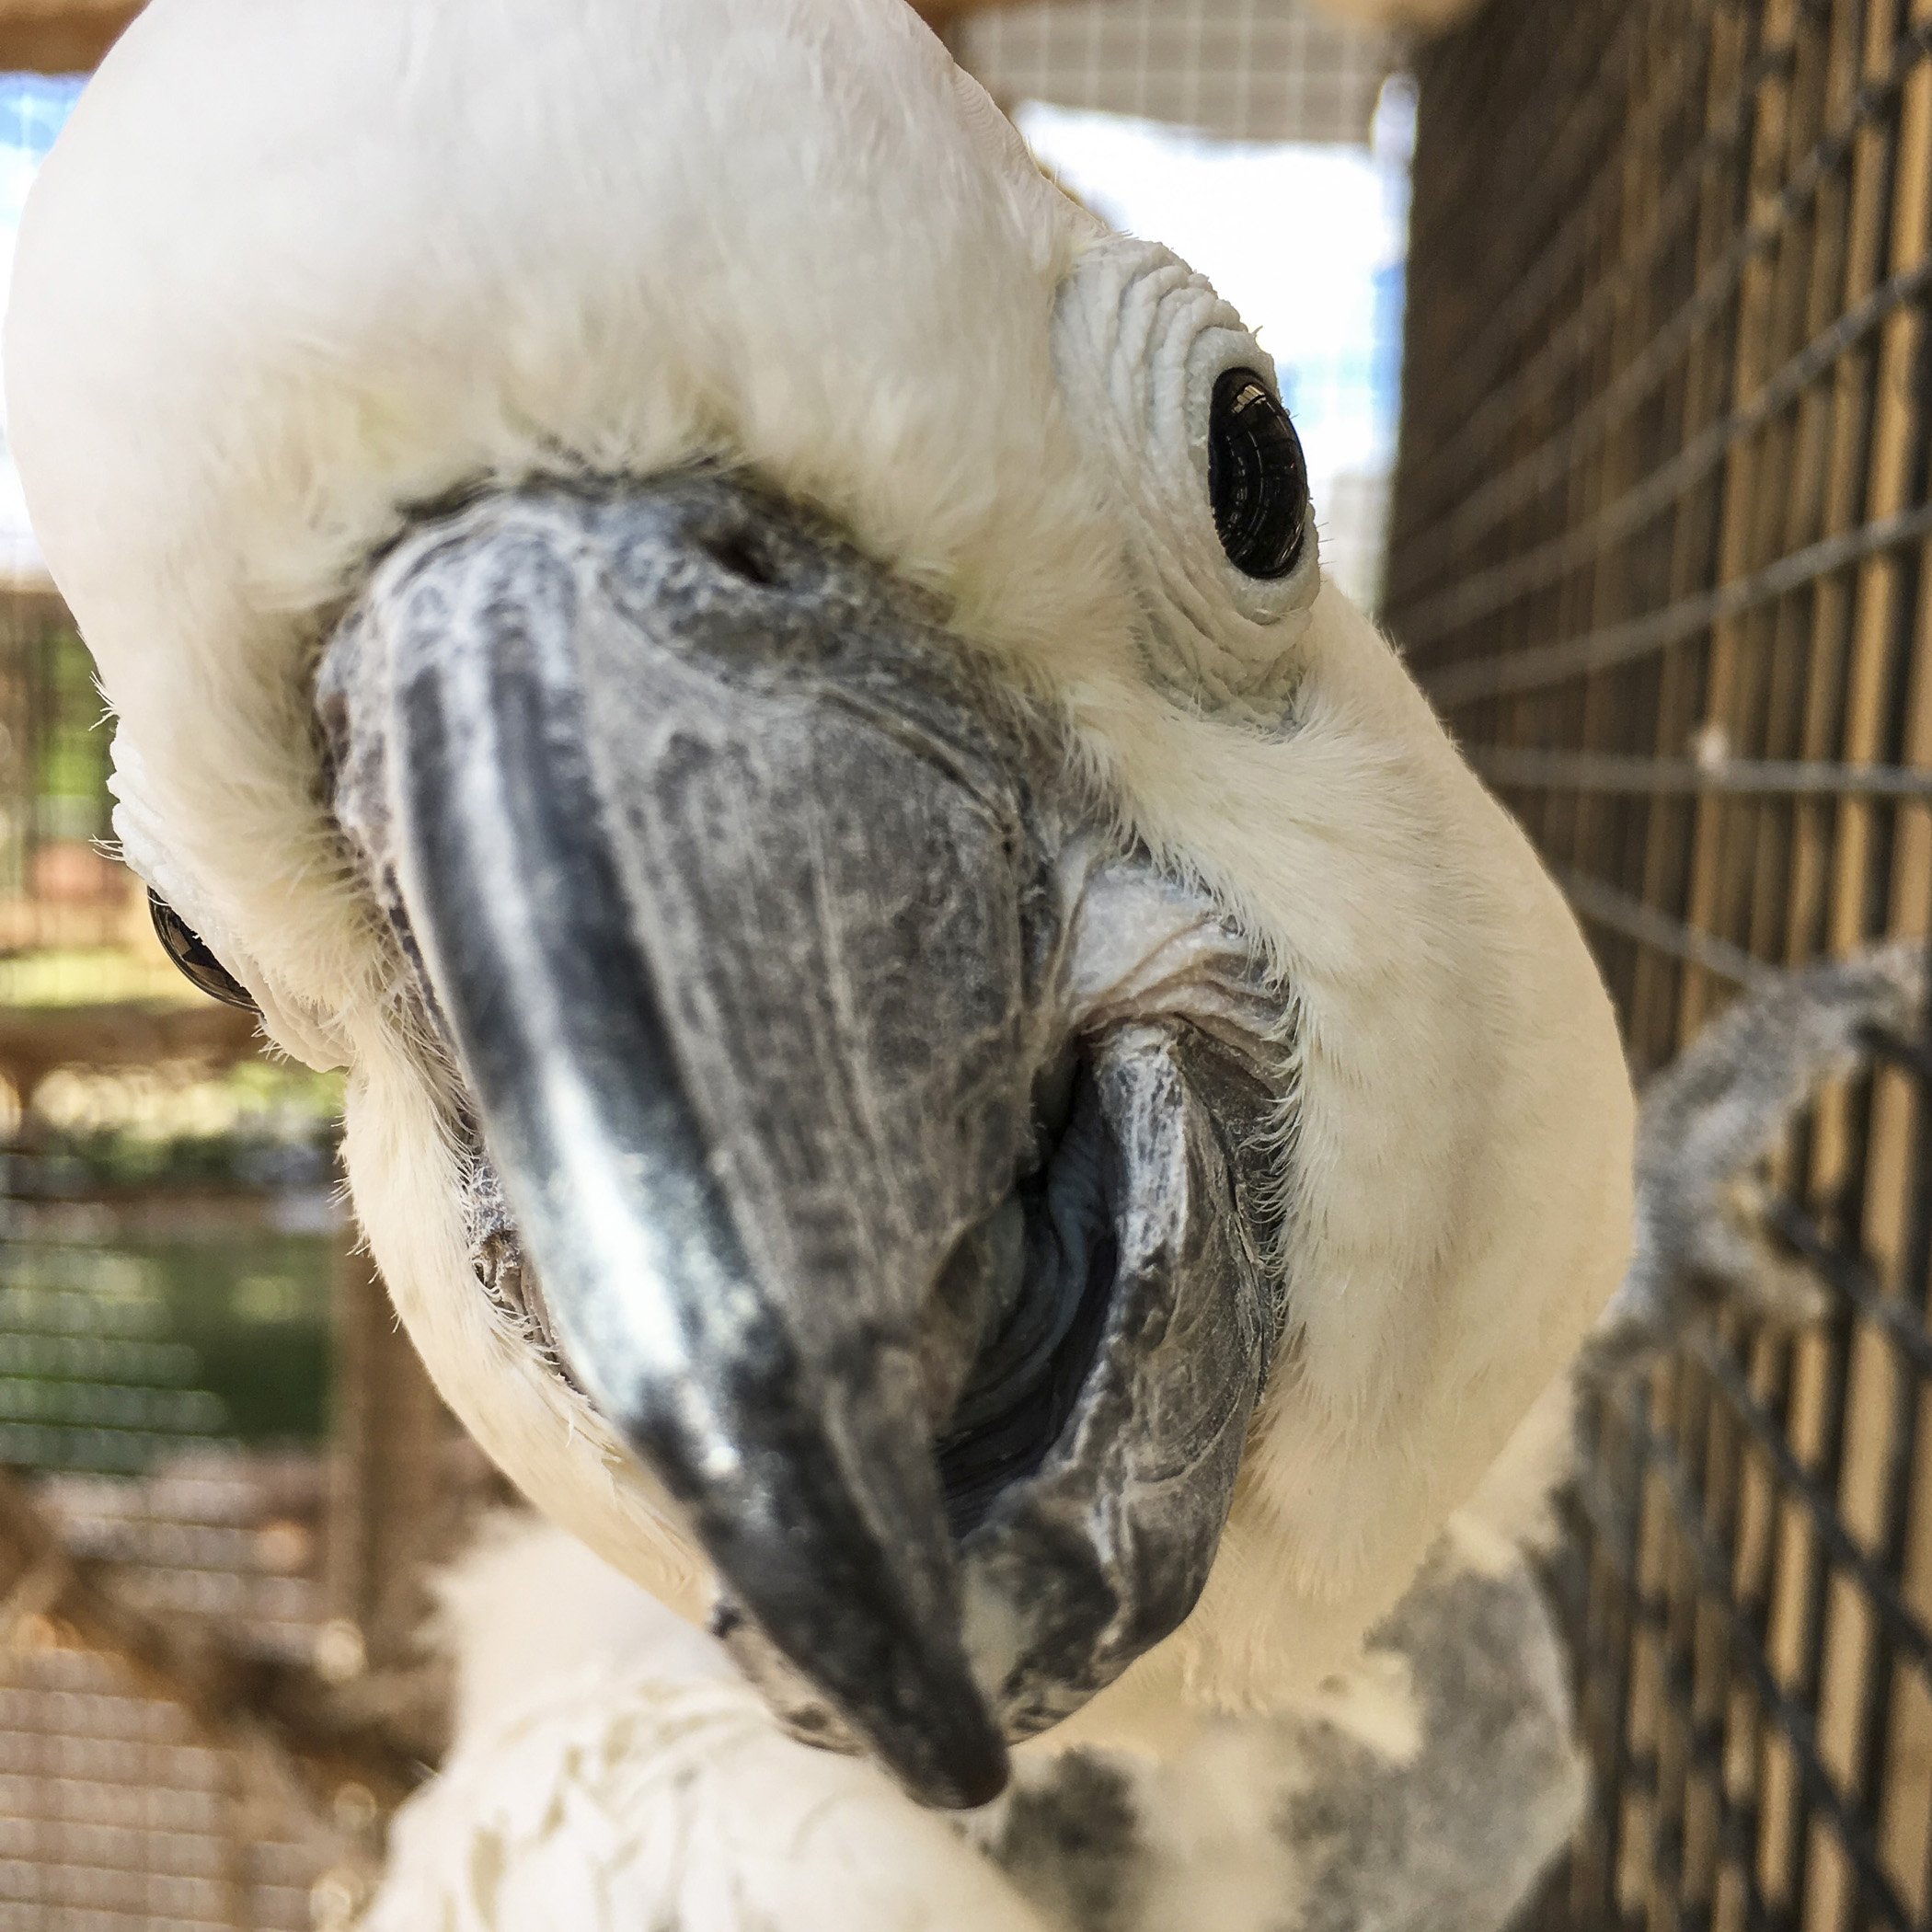  Parrot Garden's residents are both beautiful and talkative. Parrots need a lot of attention and mental stimulation, and many species can live a very long time. So a parrot is a real commitment! But there’s nothing these colorful creatures want more 